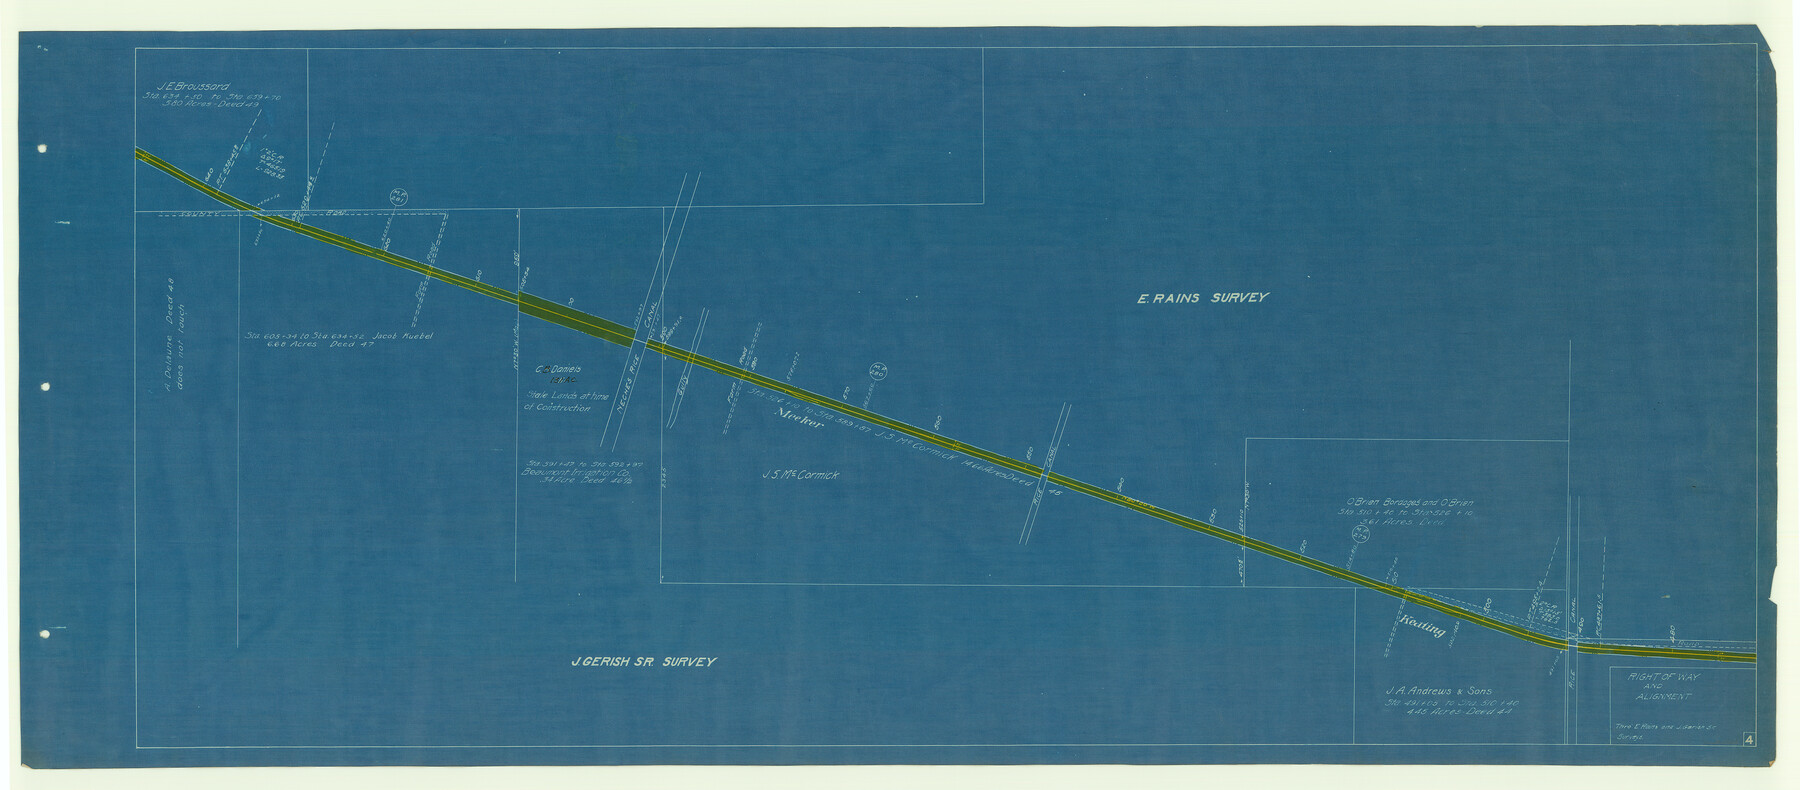 64109, [Beaumont, Sour Lake and Western Ry. Right of Way and Alignment - Frisco], General Map Collection